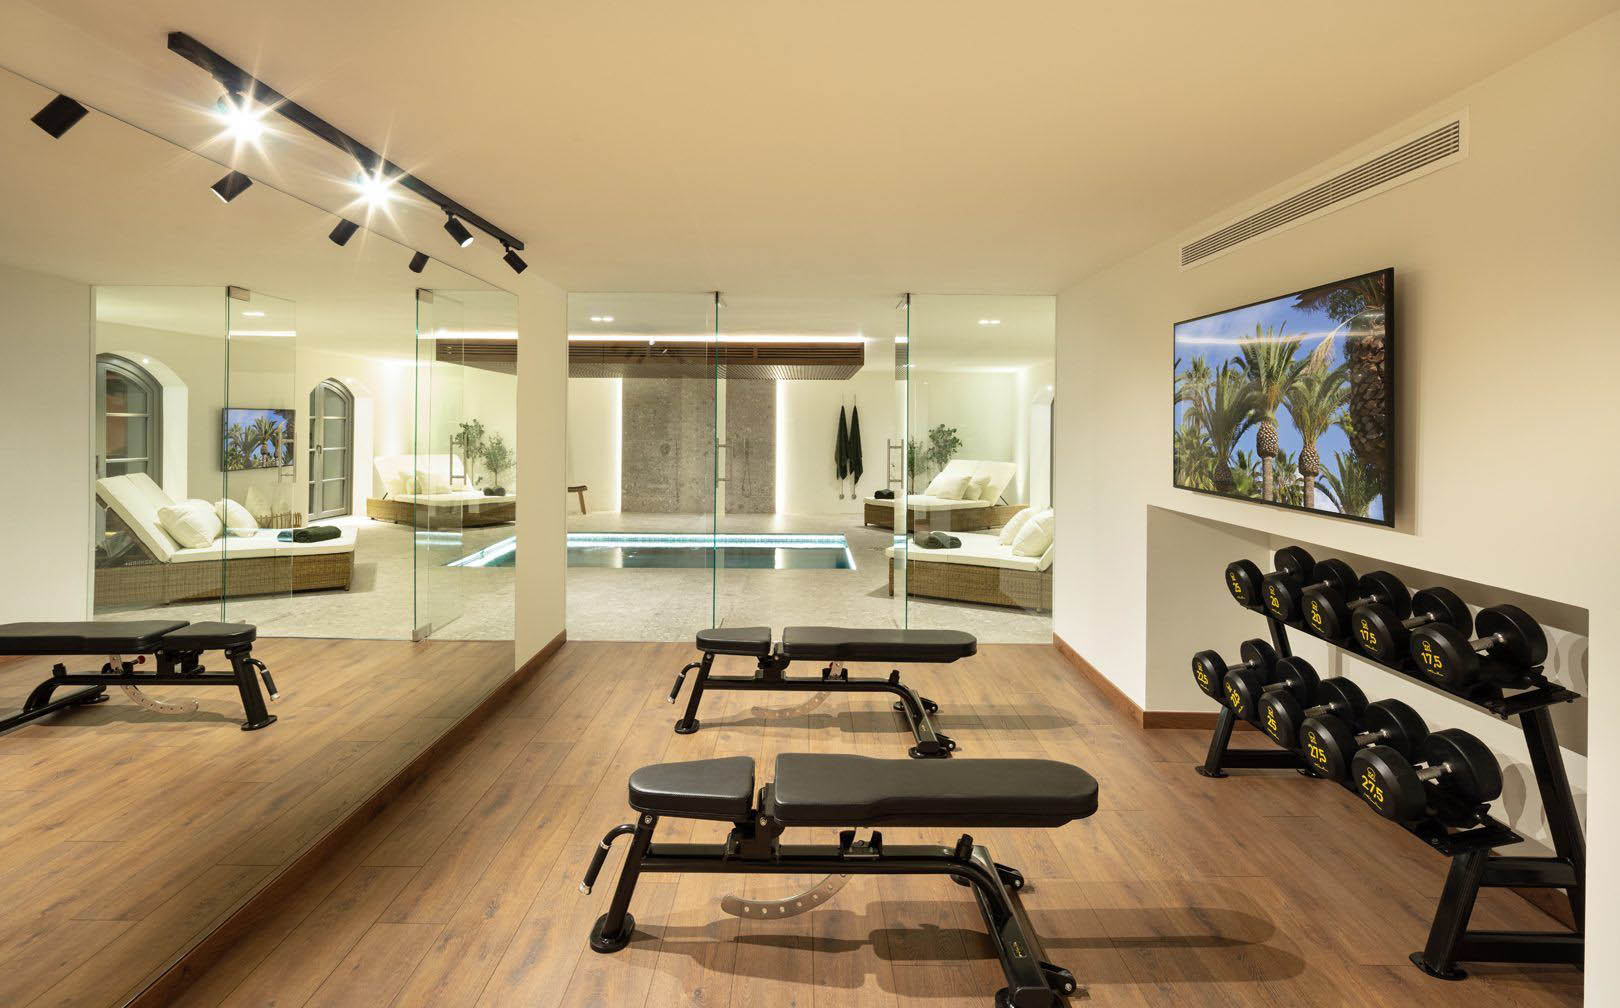 Impressive home gym with glass walls and fake wood tile flooring. Cream colored walls and wood trim.